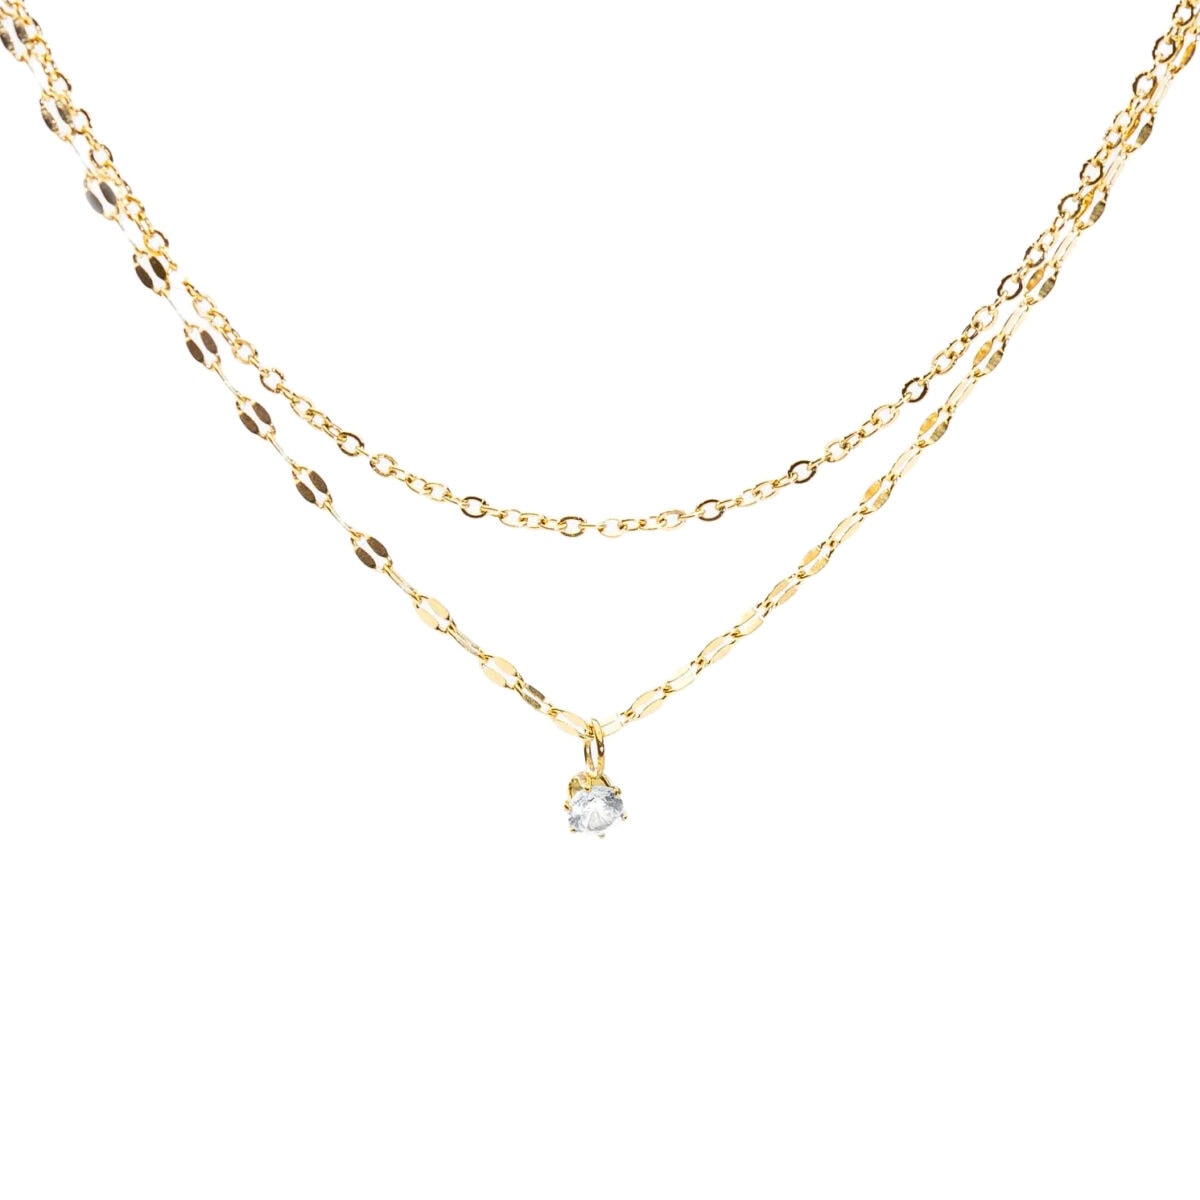 https://m.clubbella.co/product/solitaire-layer-gold-necklace/ Solitaire Layer Gold Necklace